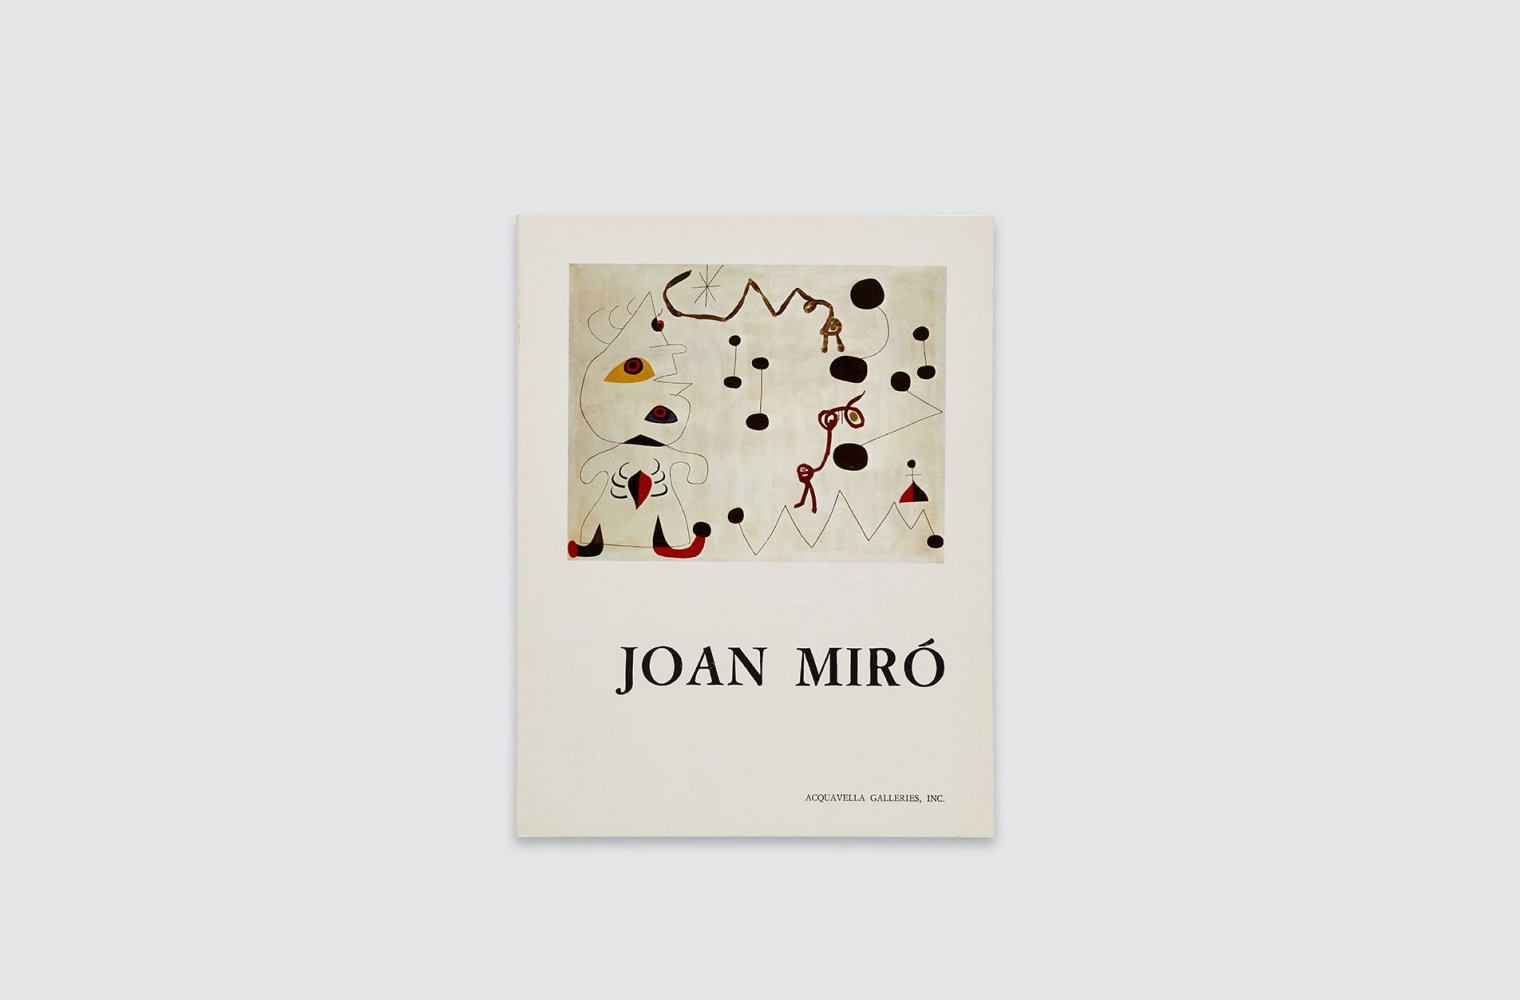 Catalogue for Joan Miró exhibition, fall 1972.